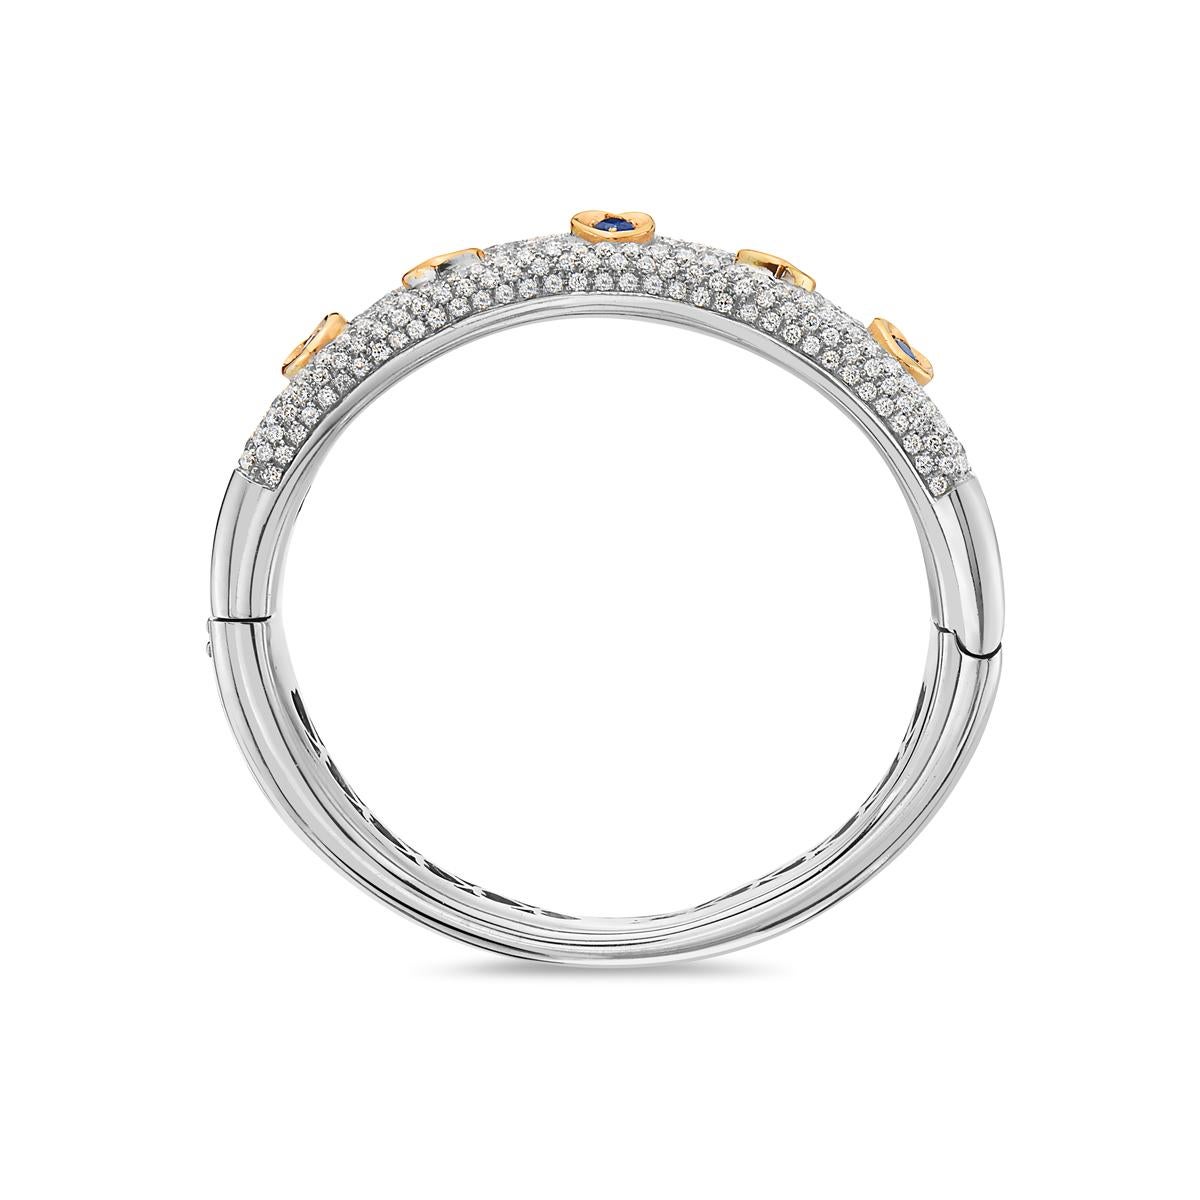 This statement bangle features 8.76 carats of diamonds and 1.15 carats of sapphire set in 18K white and yellow gold. Diameter is 2 1/4 inches. 72 grams total weight. Made in  Italy. 

